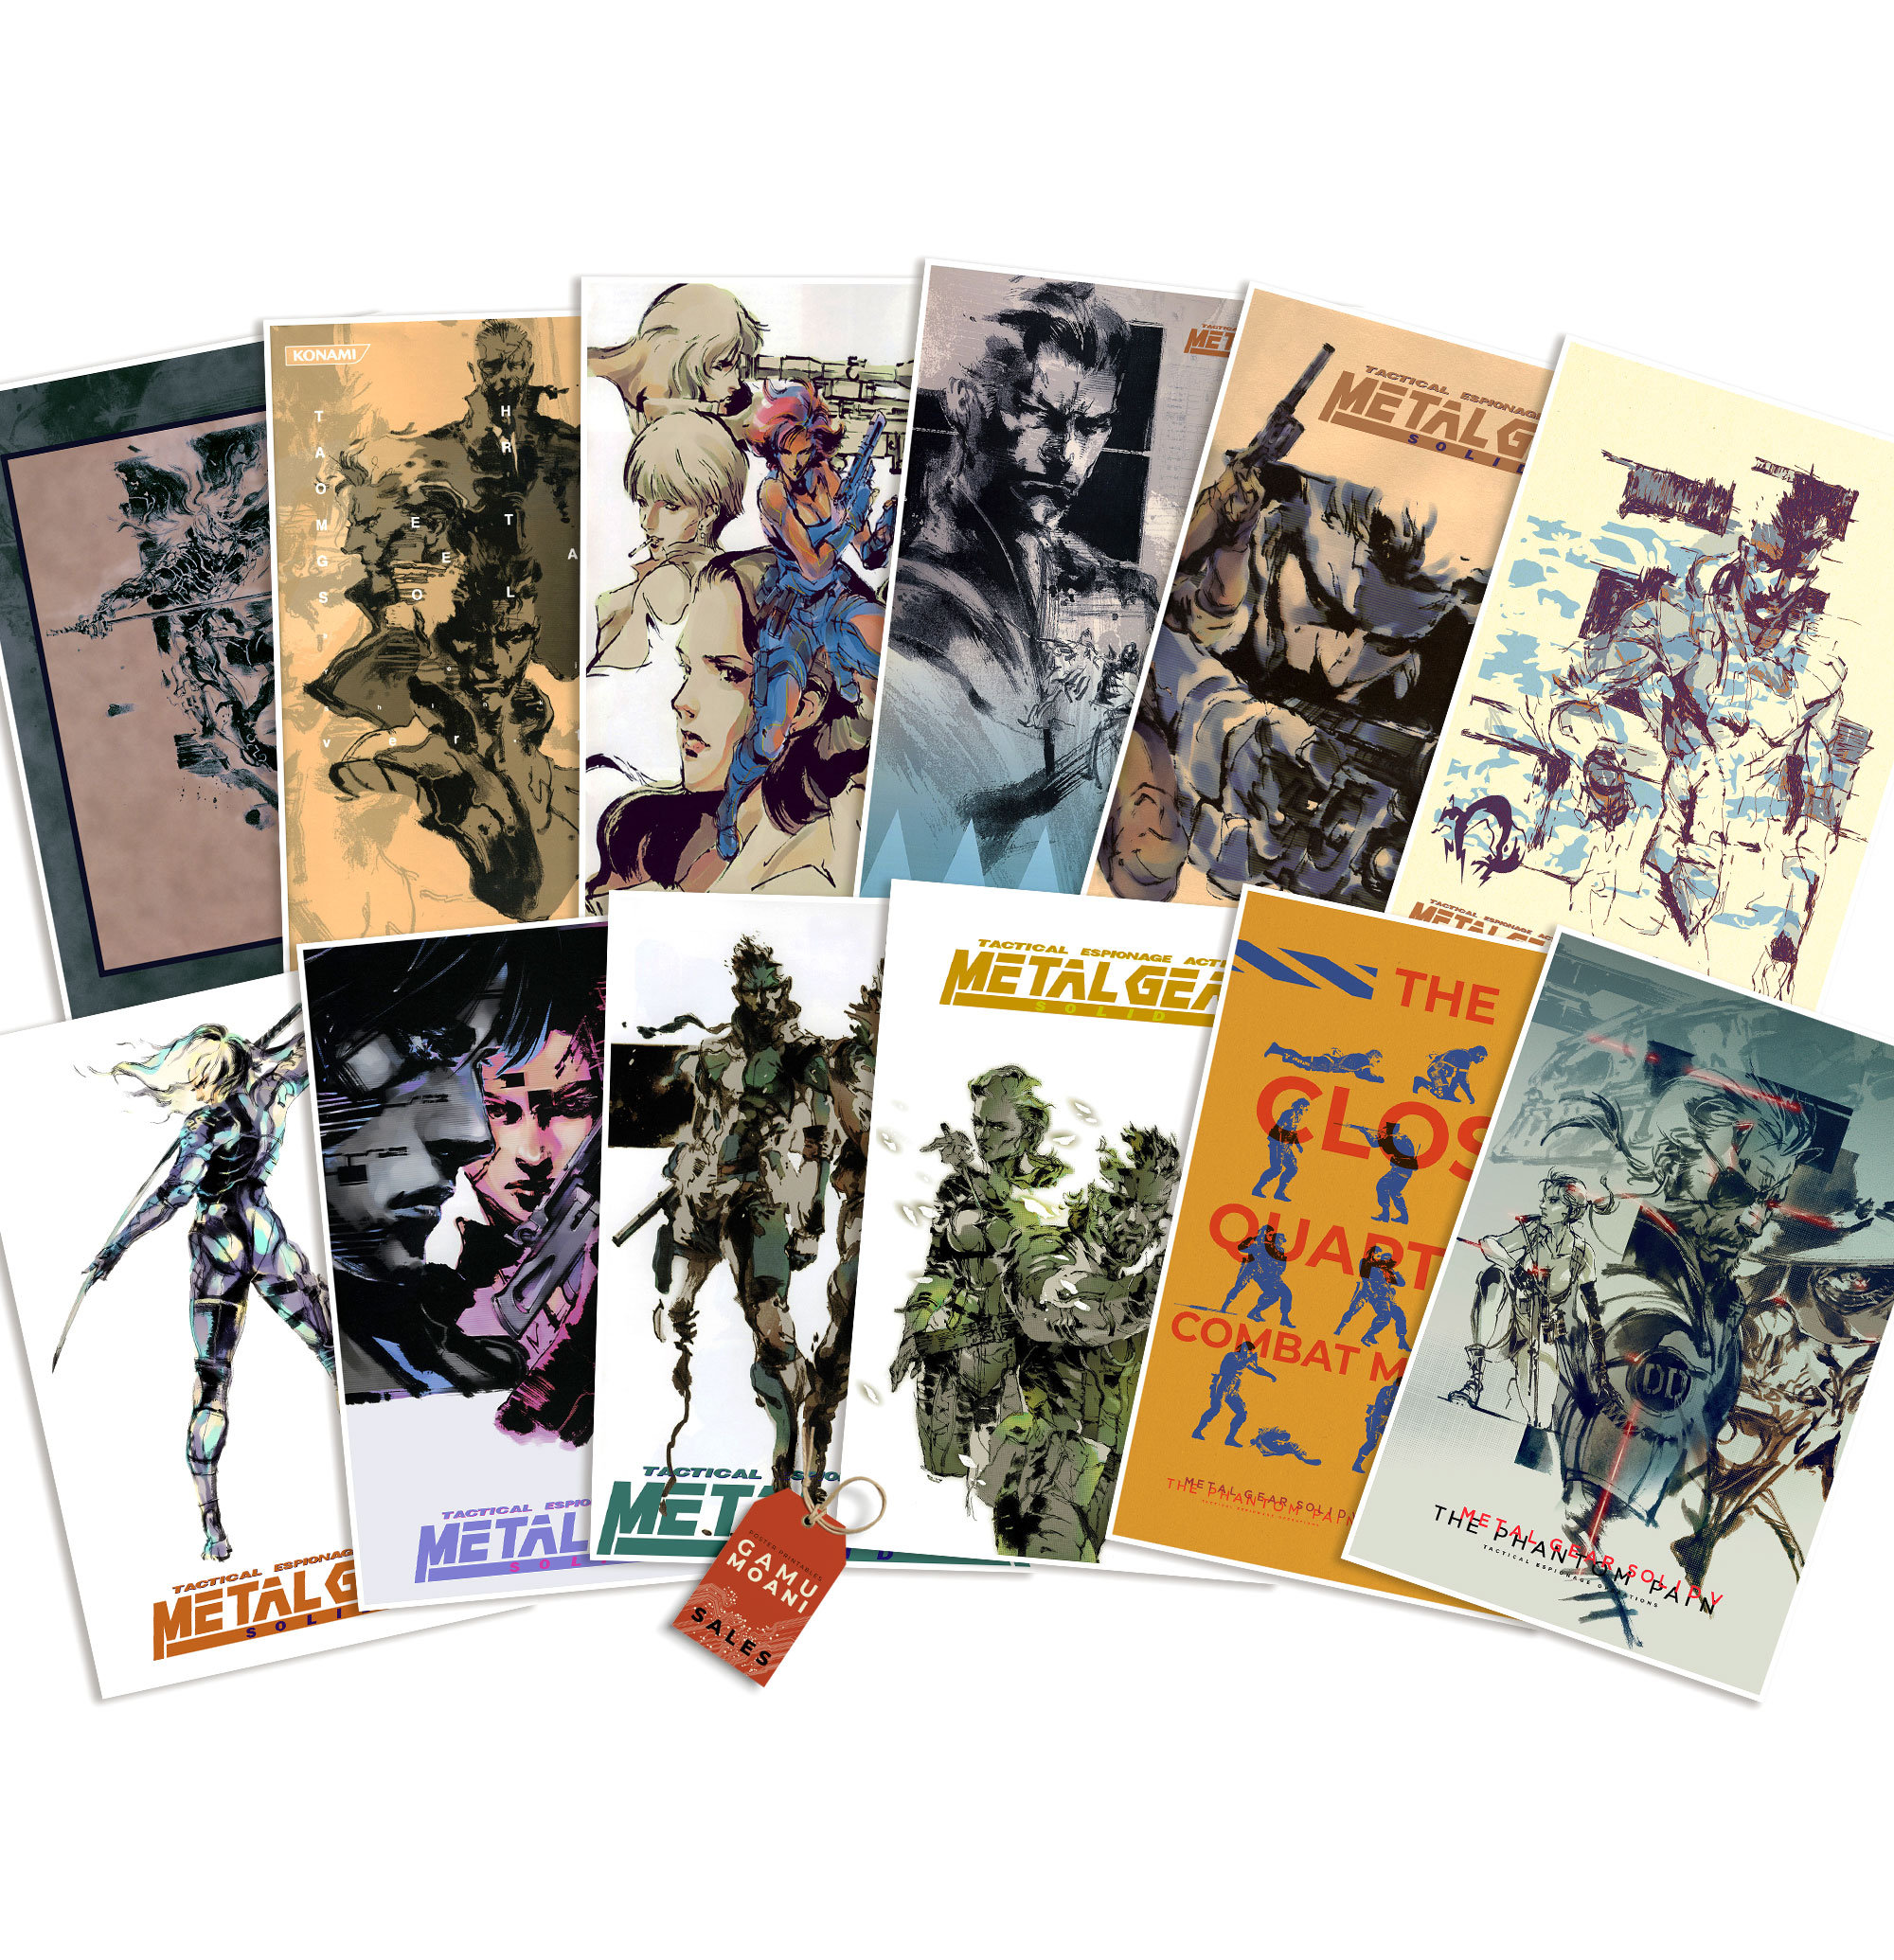 Metal Gear Solid 4 Poster Poster for Sale by PFCpatrickC